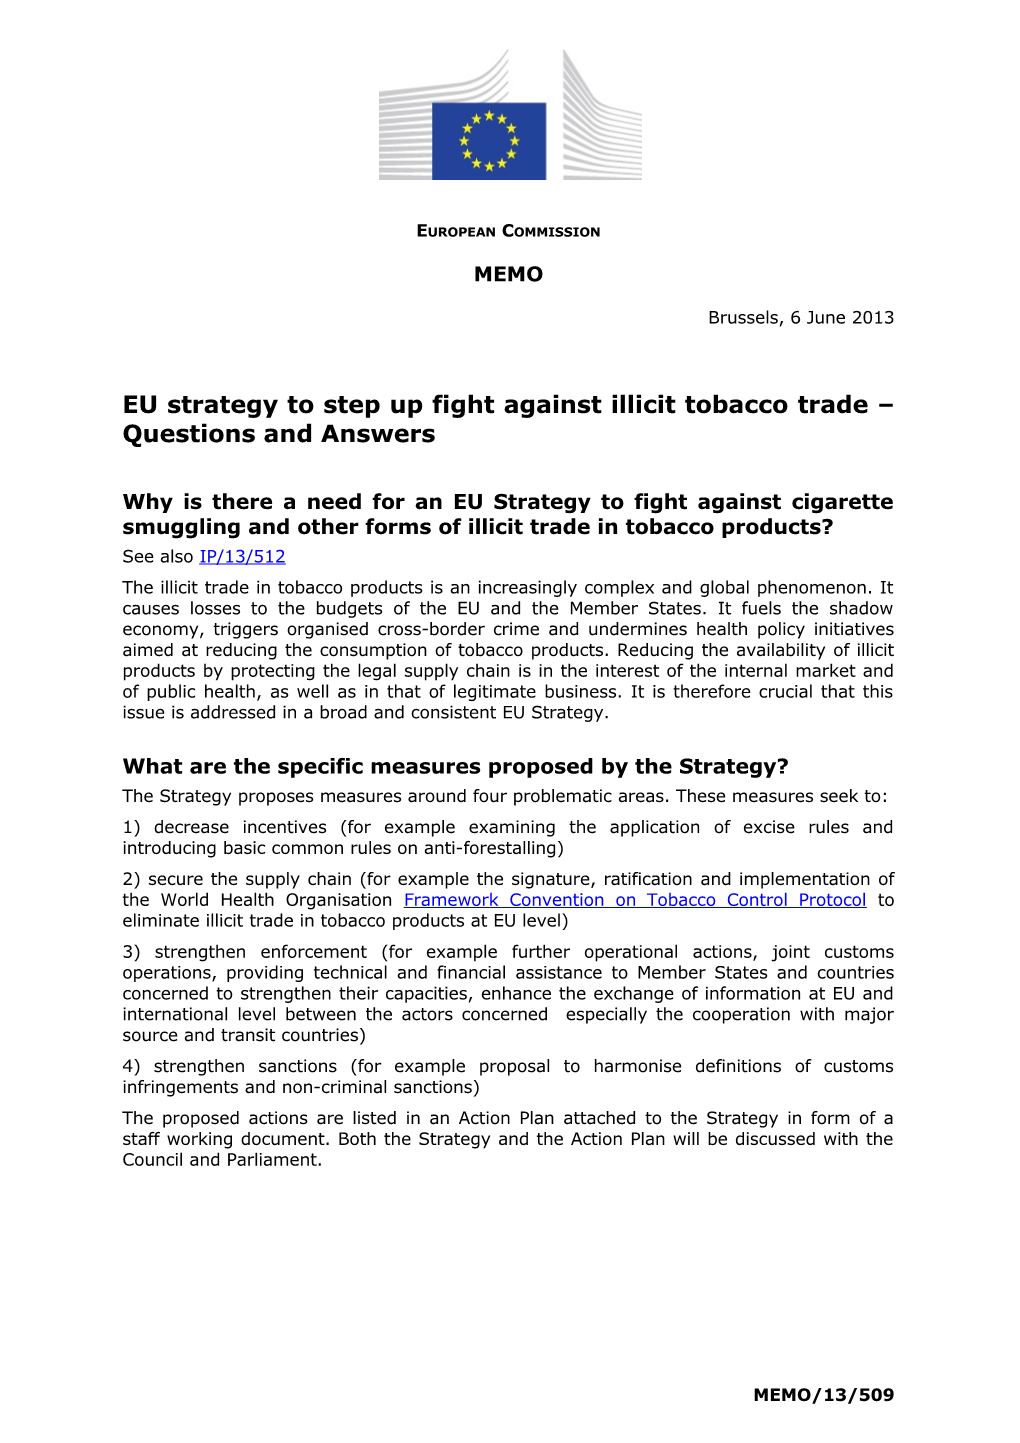 EU Strategy to Step up Fight Against Illicit Tobacco Trade Questions and Answers